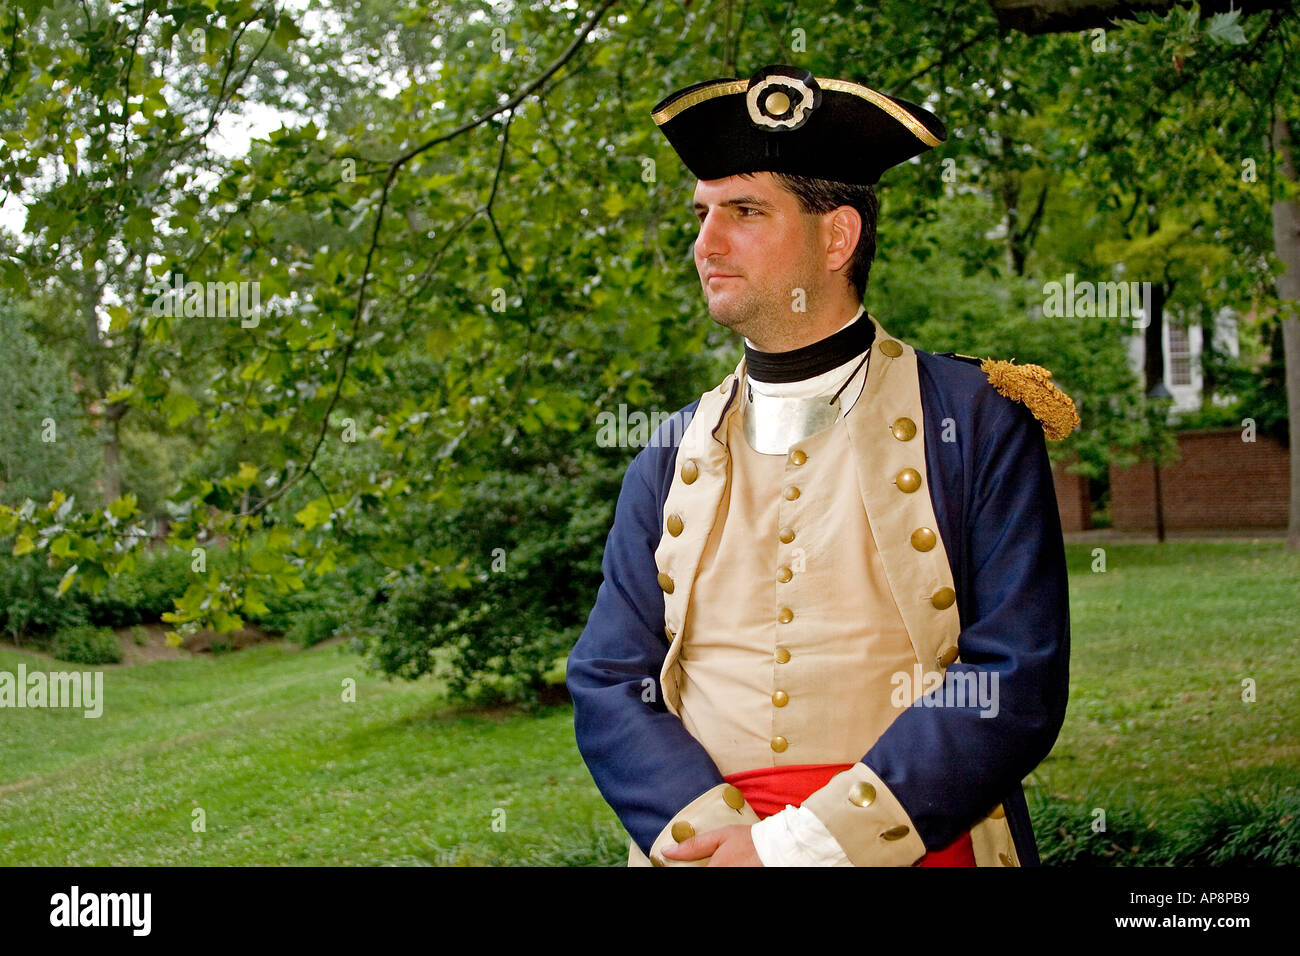 re enactor dressed as a Revolutionary War soldier Independence National Historical Park Philadelphia Pennsylvania Stock Photo